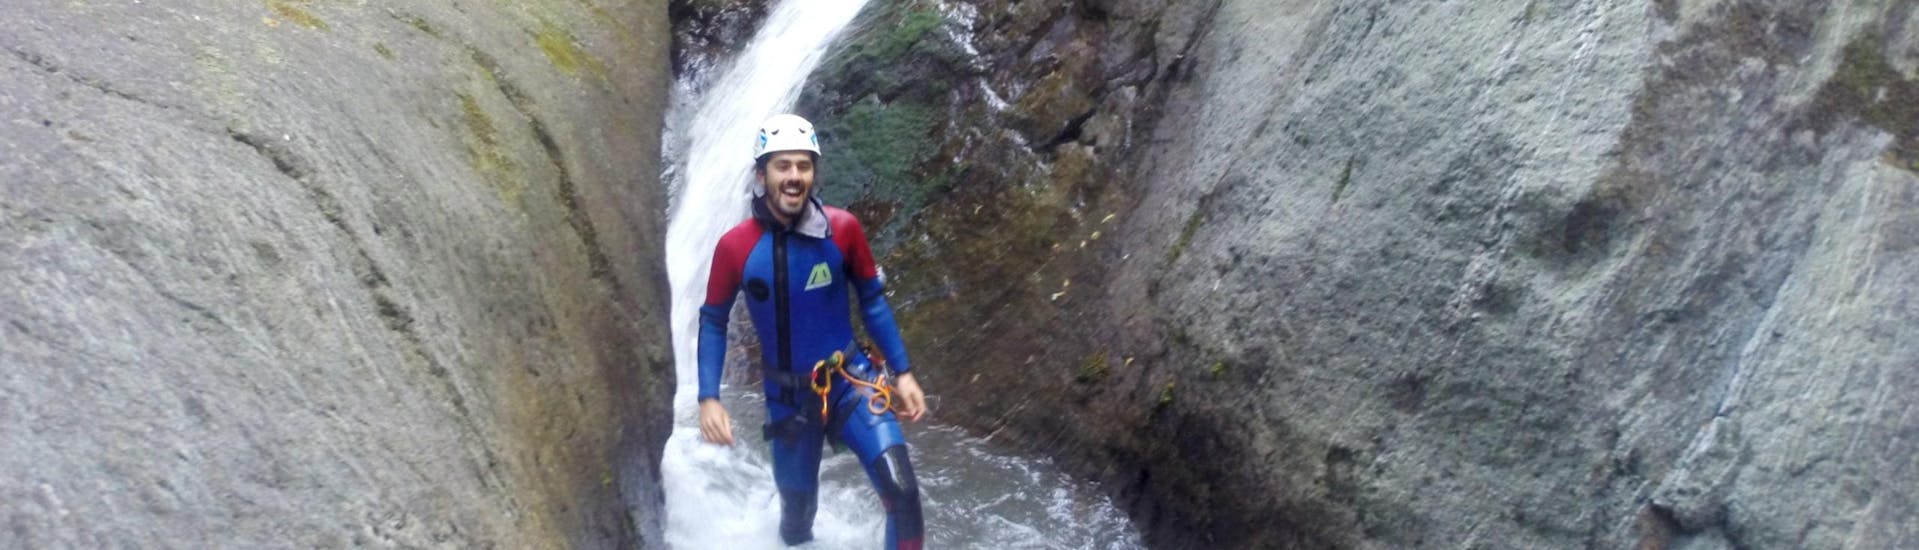 A young man can be seen wading through the water in a narrow ravine while Canyoning in Rio Vallungo - Water Park with Canyoning Valle D'Aosta.